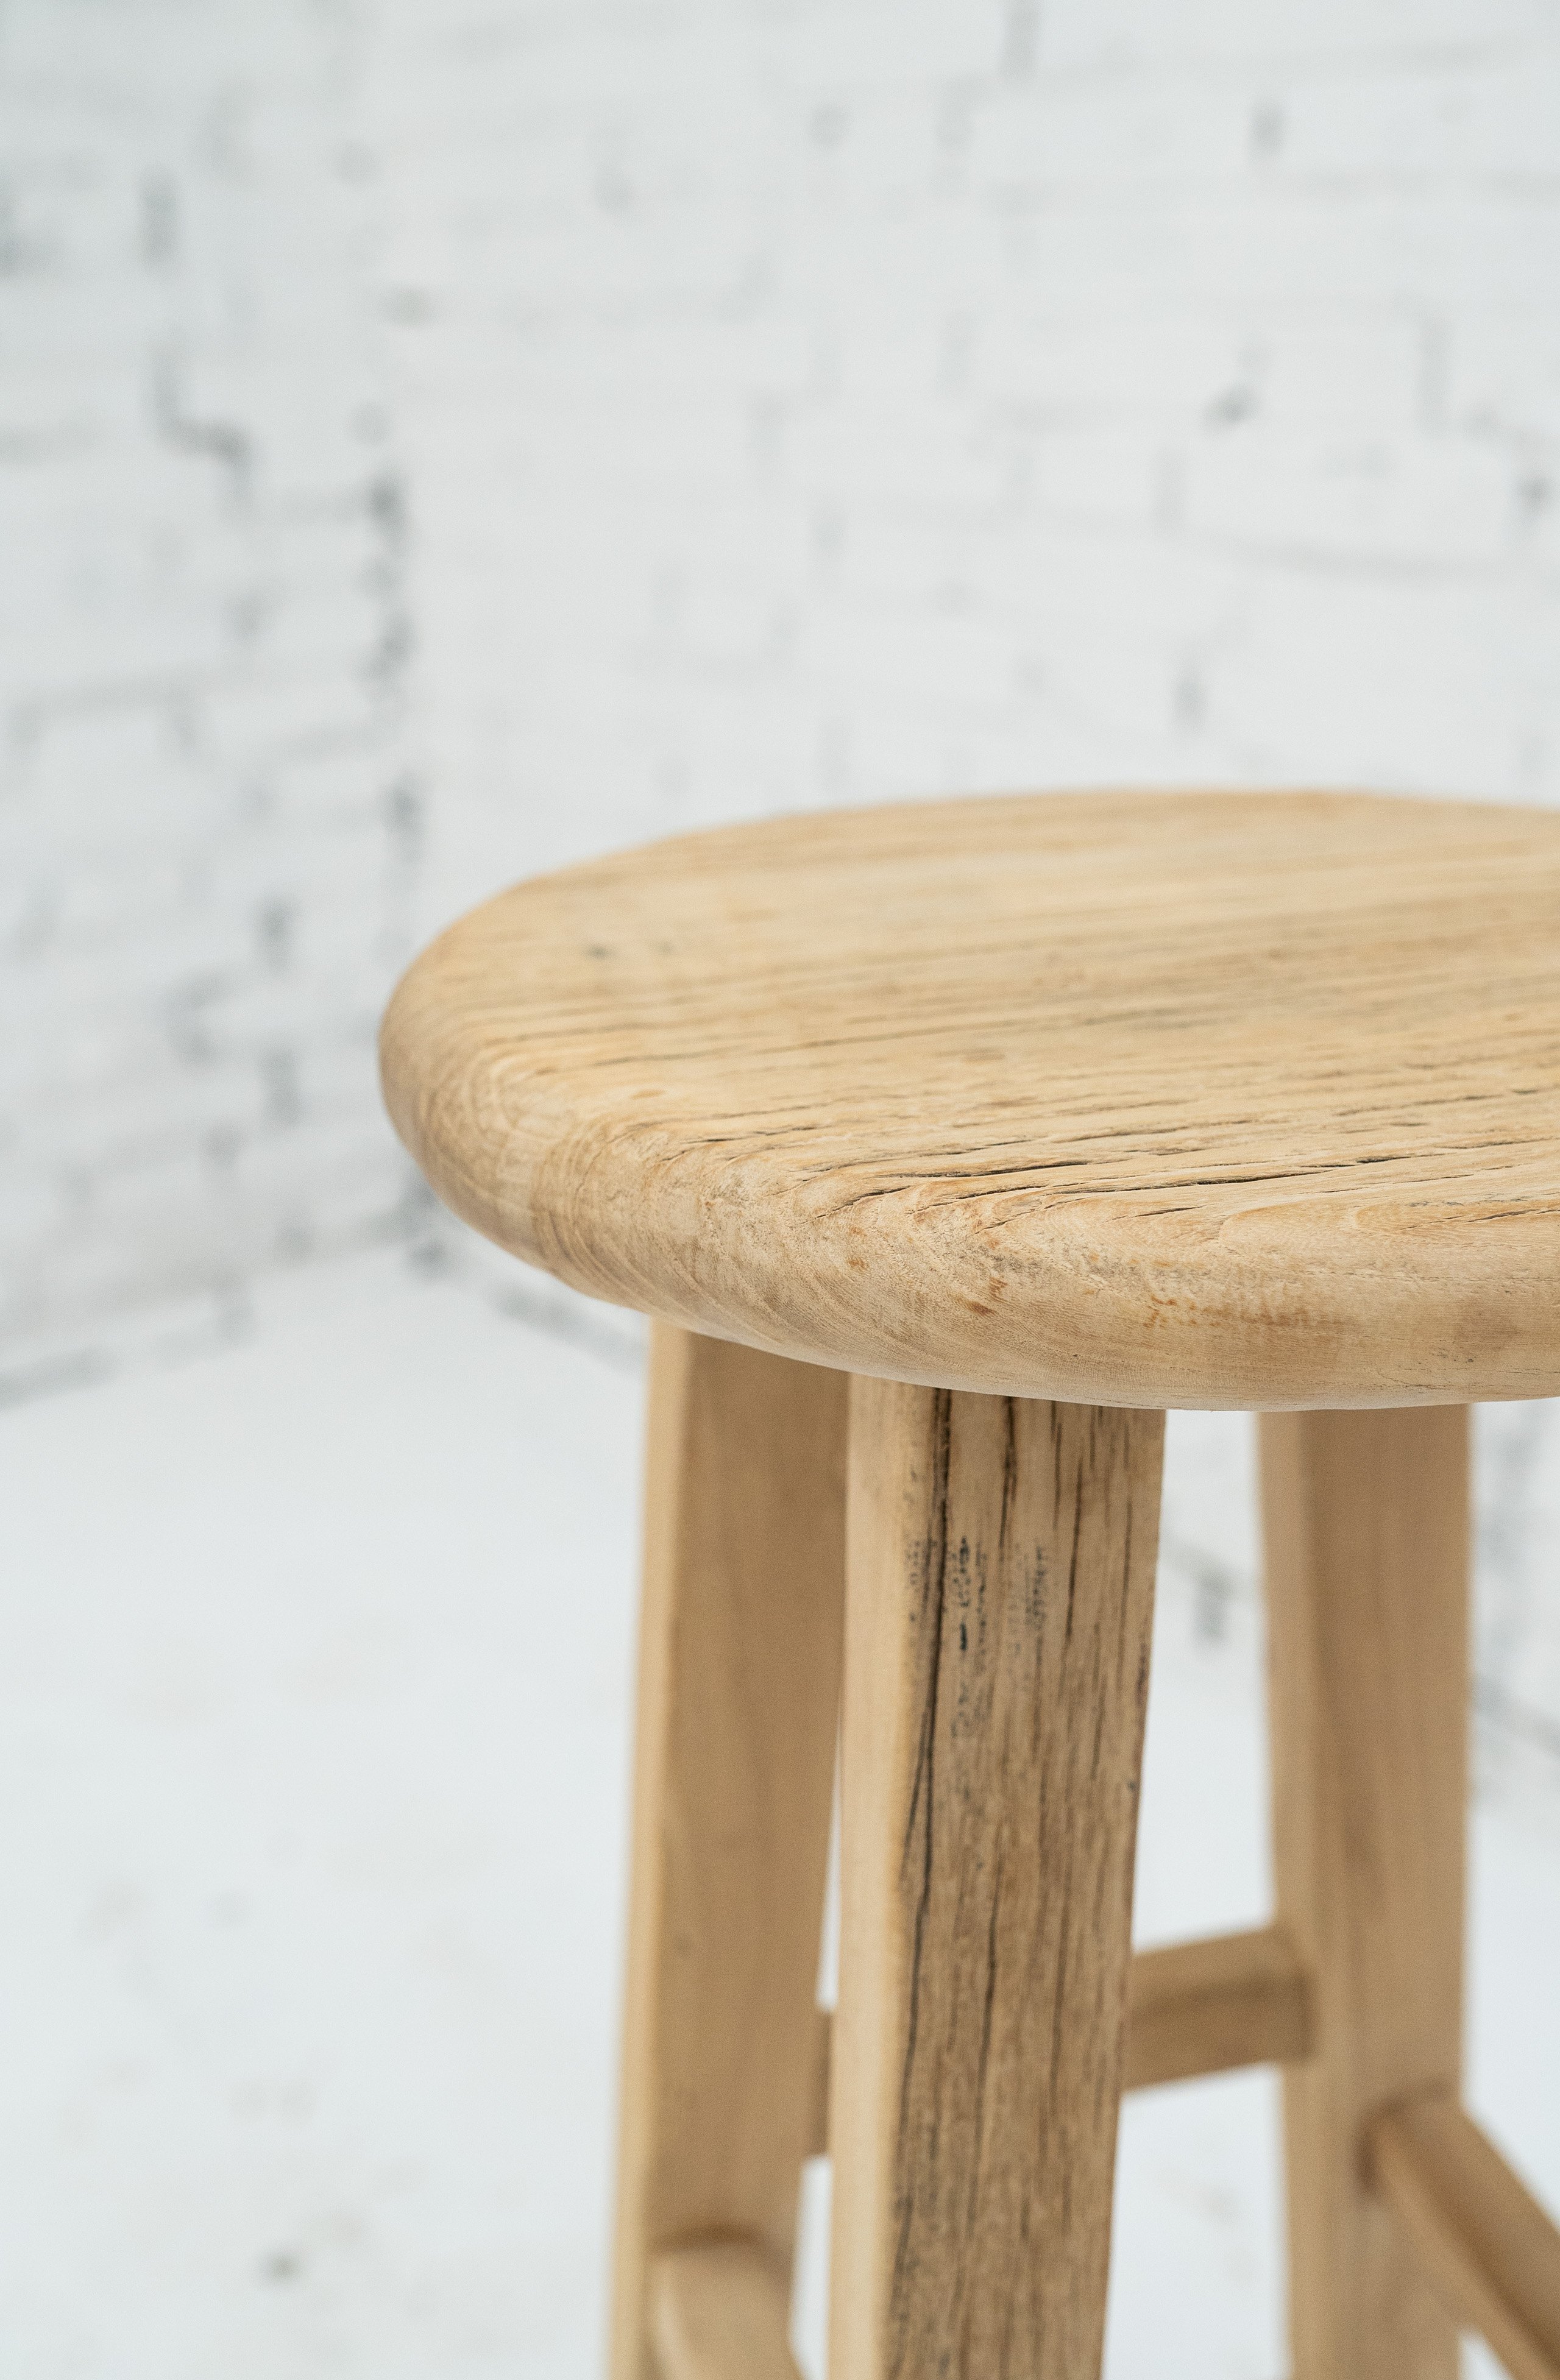 2 x Tall Elm Stool: Stunning wooden bar stools from the Heibei province of China. - Image 3 of 4